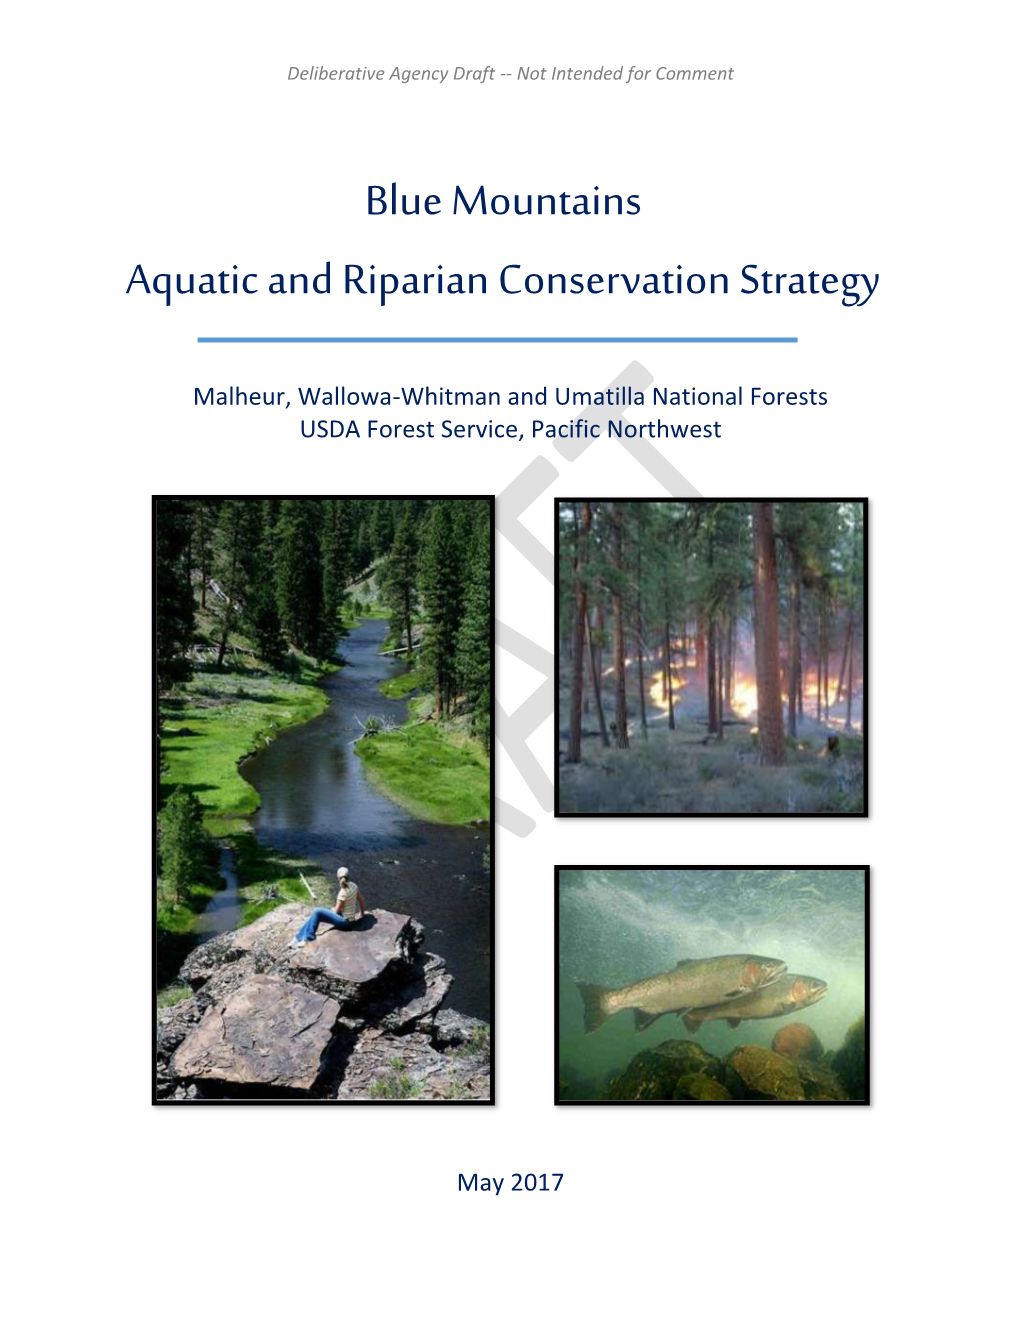 Blue Mountains Aquatic and Riparian Conservation Strategy